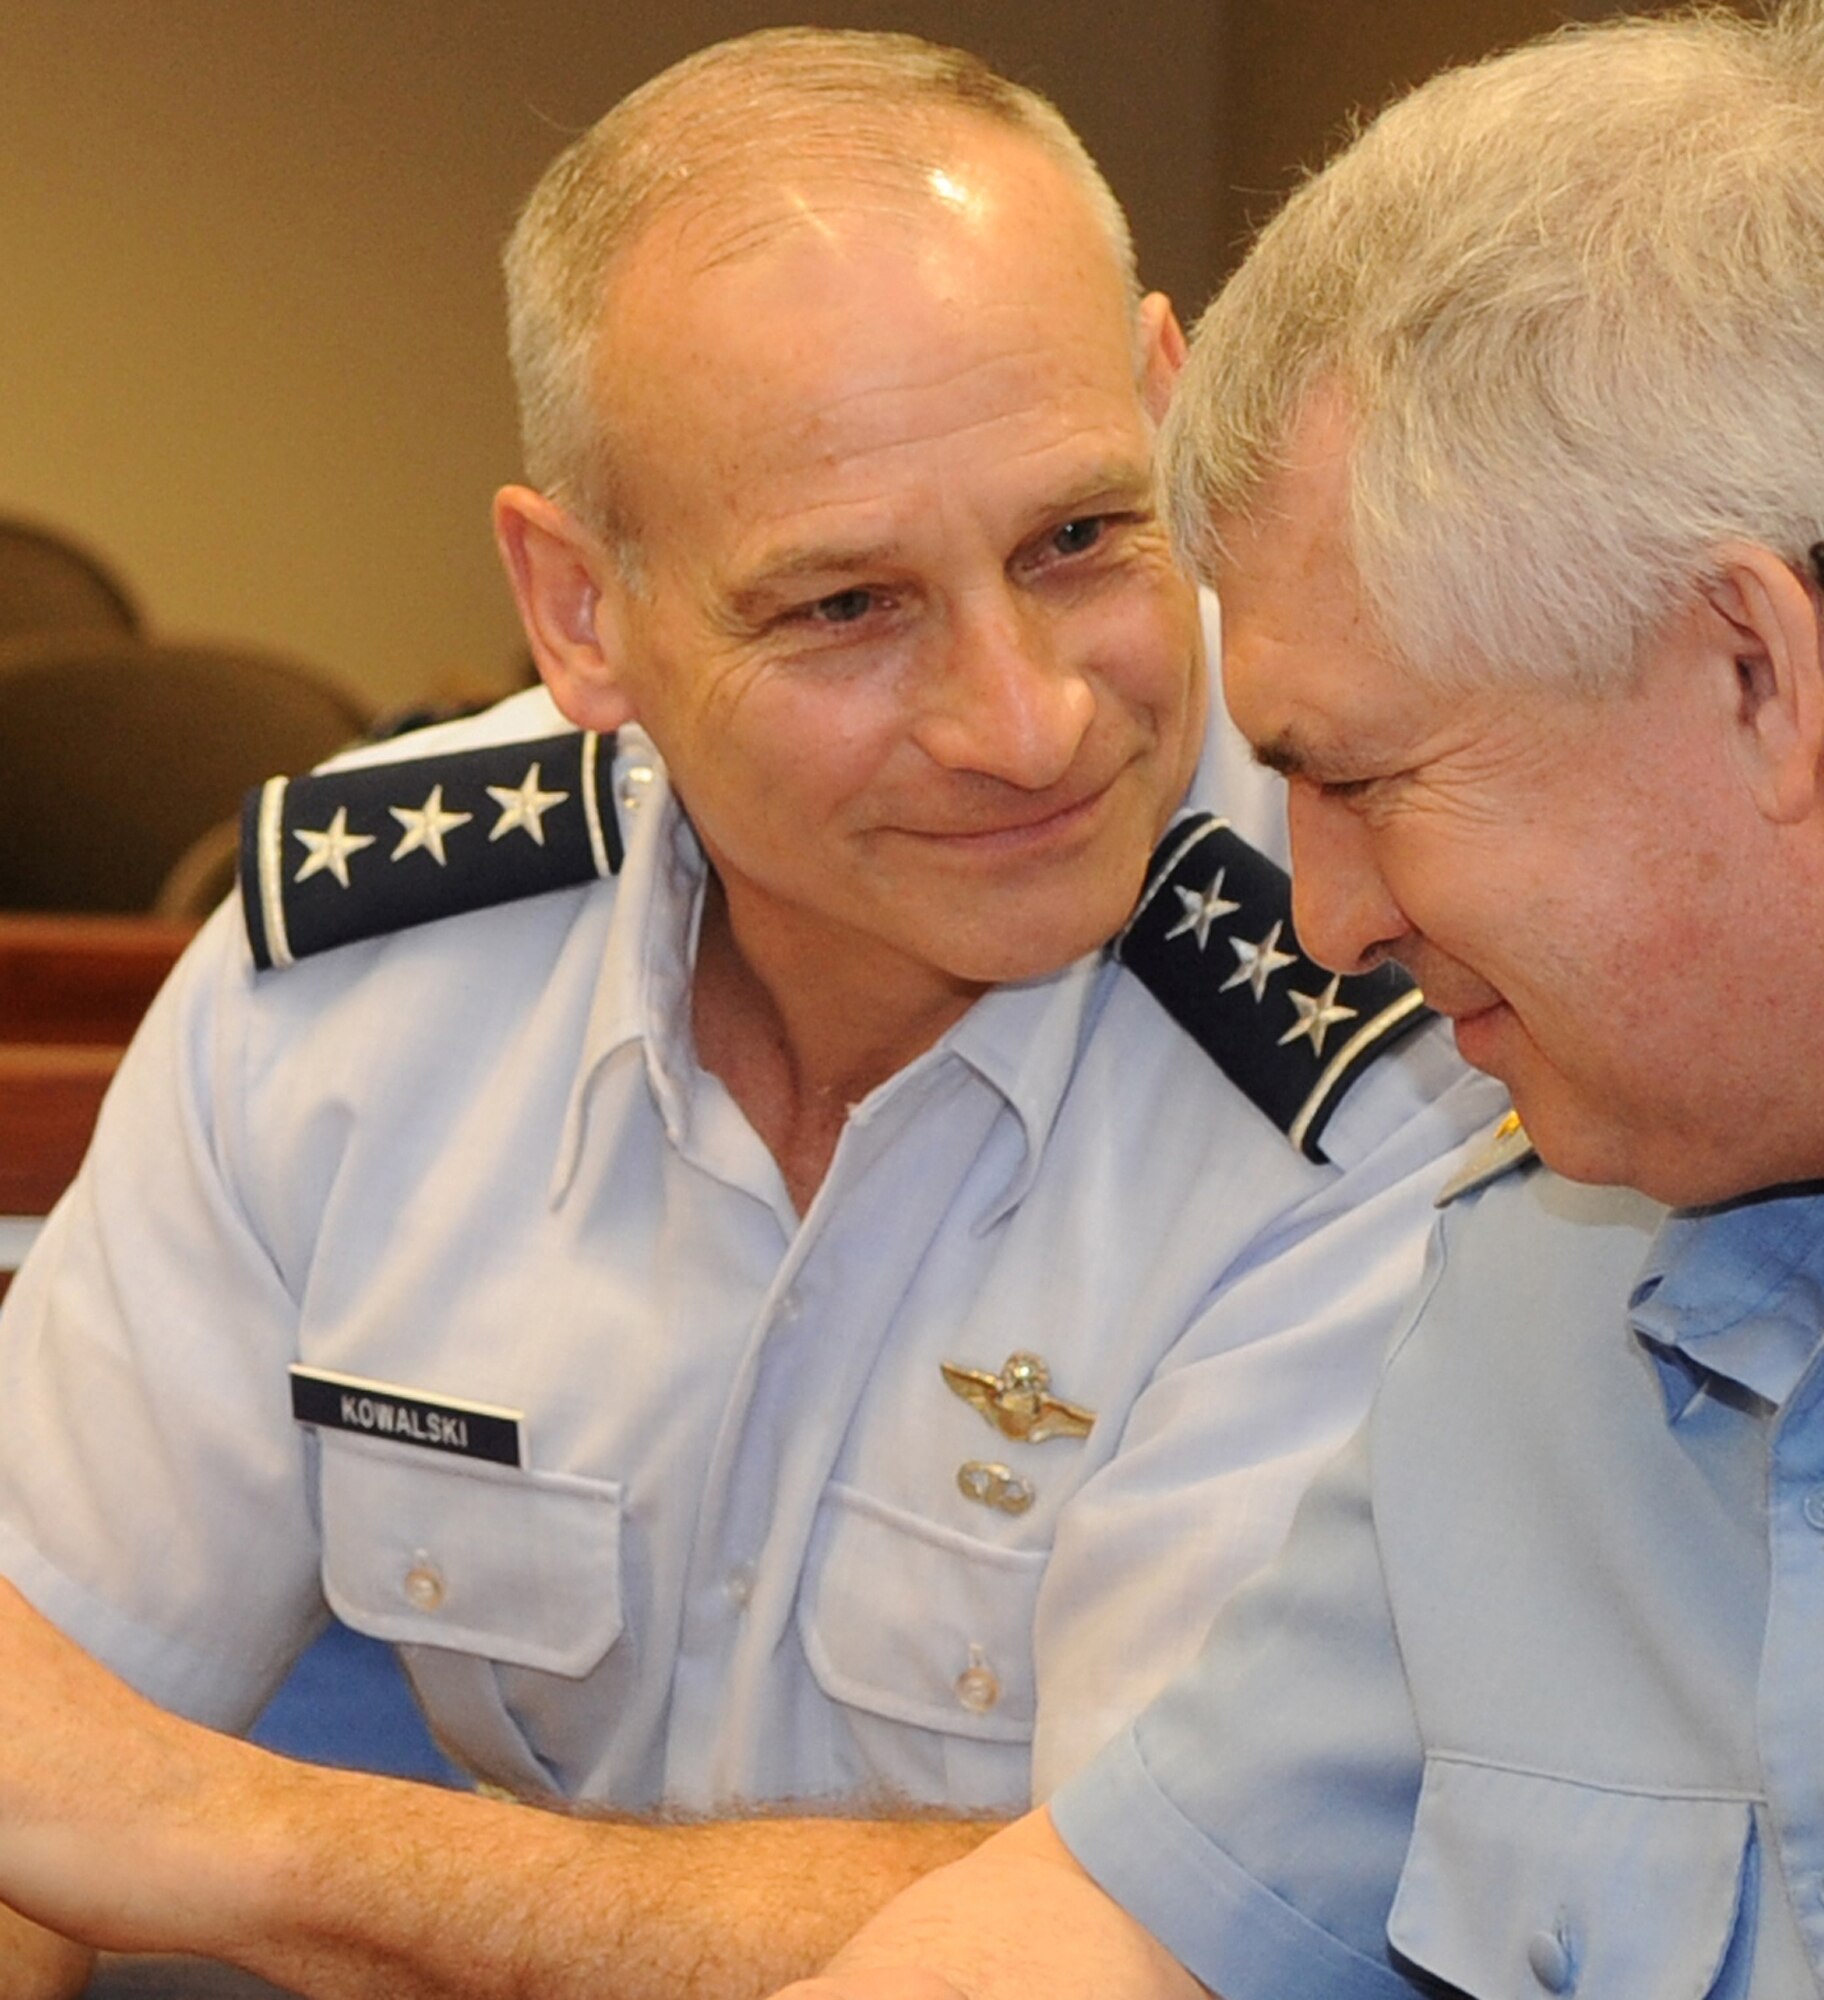 BARKSDALE AIR FORCE BASE, La - Lt. Gen. Jim Kowalski, Air Force Global
Strike Command commander, and General-Colonel Alexander Nikolayevich Zelin,
Commander-in Chief of the Air Force Russian Federation, enjoy some
light-hearted humor after a Global Strike Command mission briefing, April 4.
Air Force Global Strike Command was the Russian Air Chief's first visit as
part of the Chief of Staff of the Air Force's counterpart program. (U.S. Air
Force photo/Master Sgt. Corey A. Clements)  